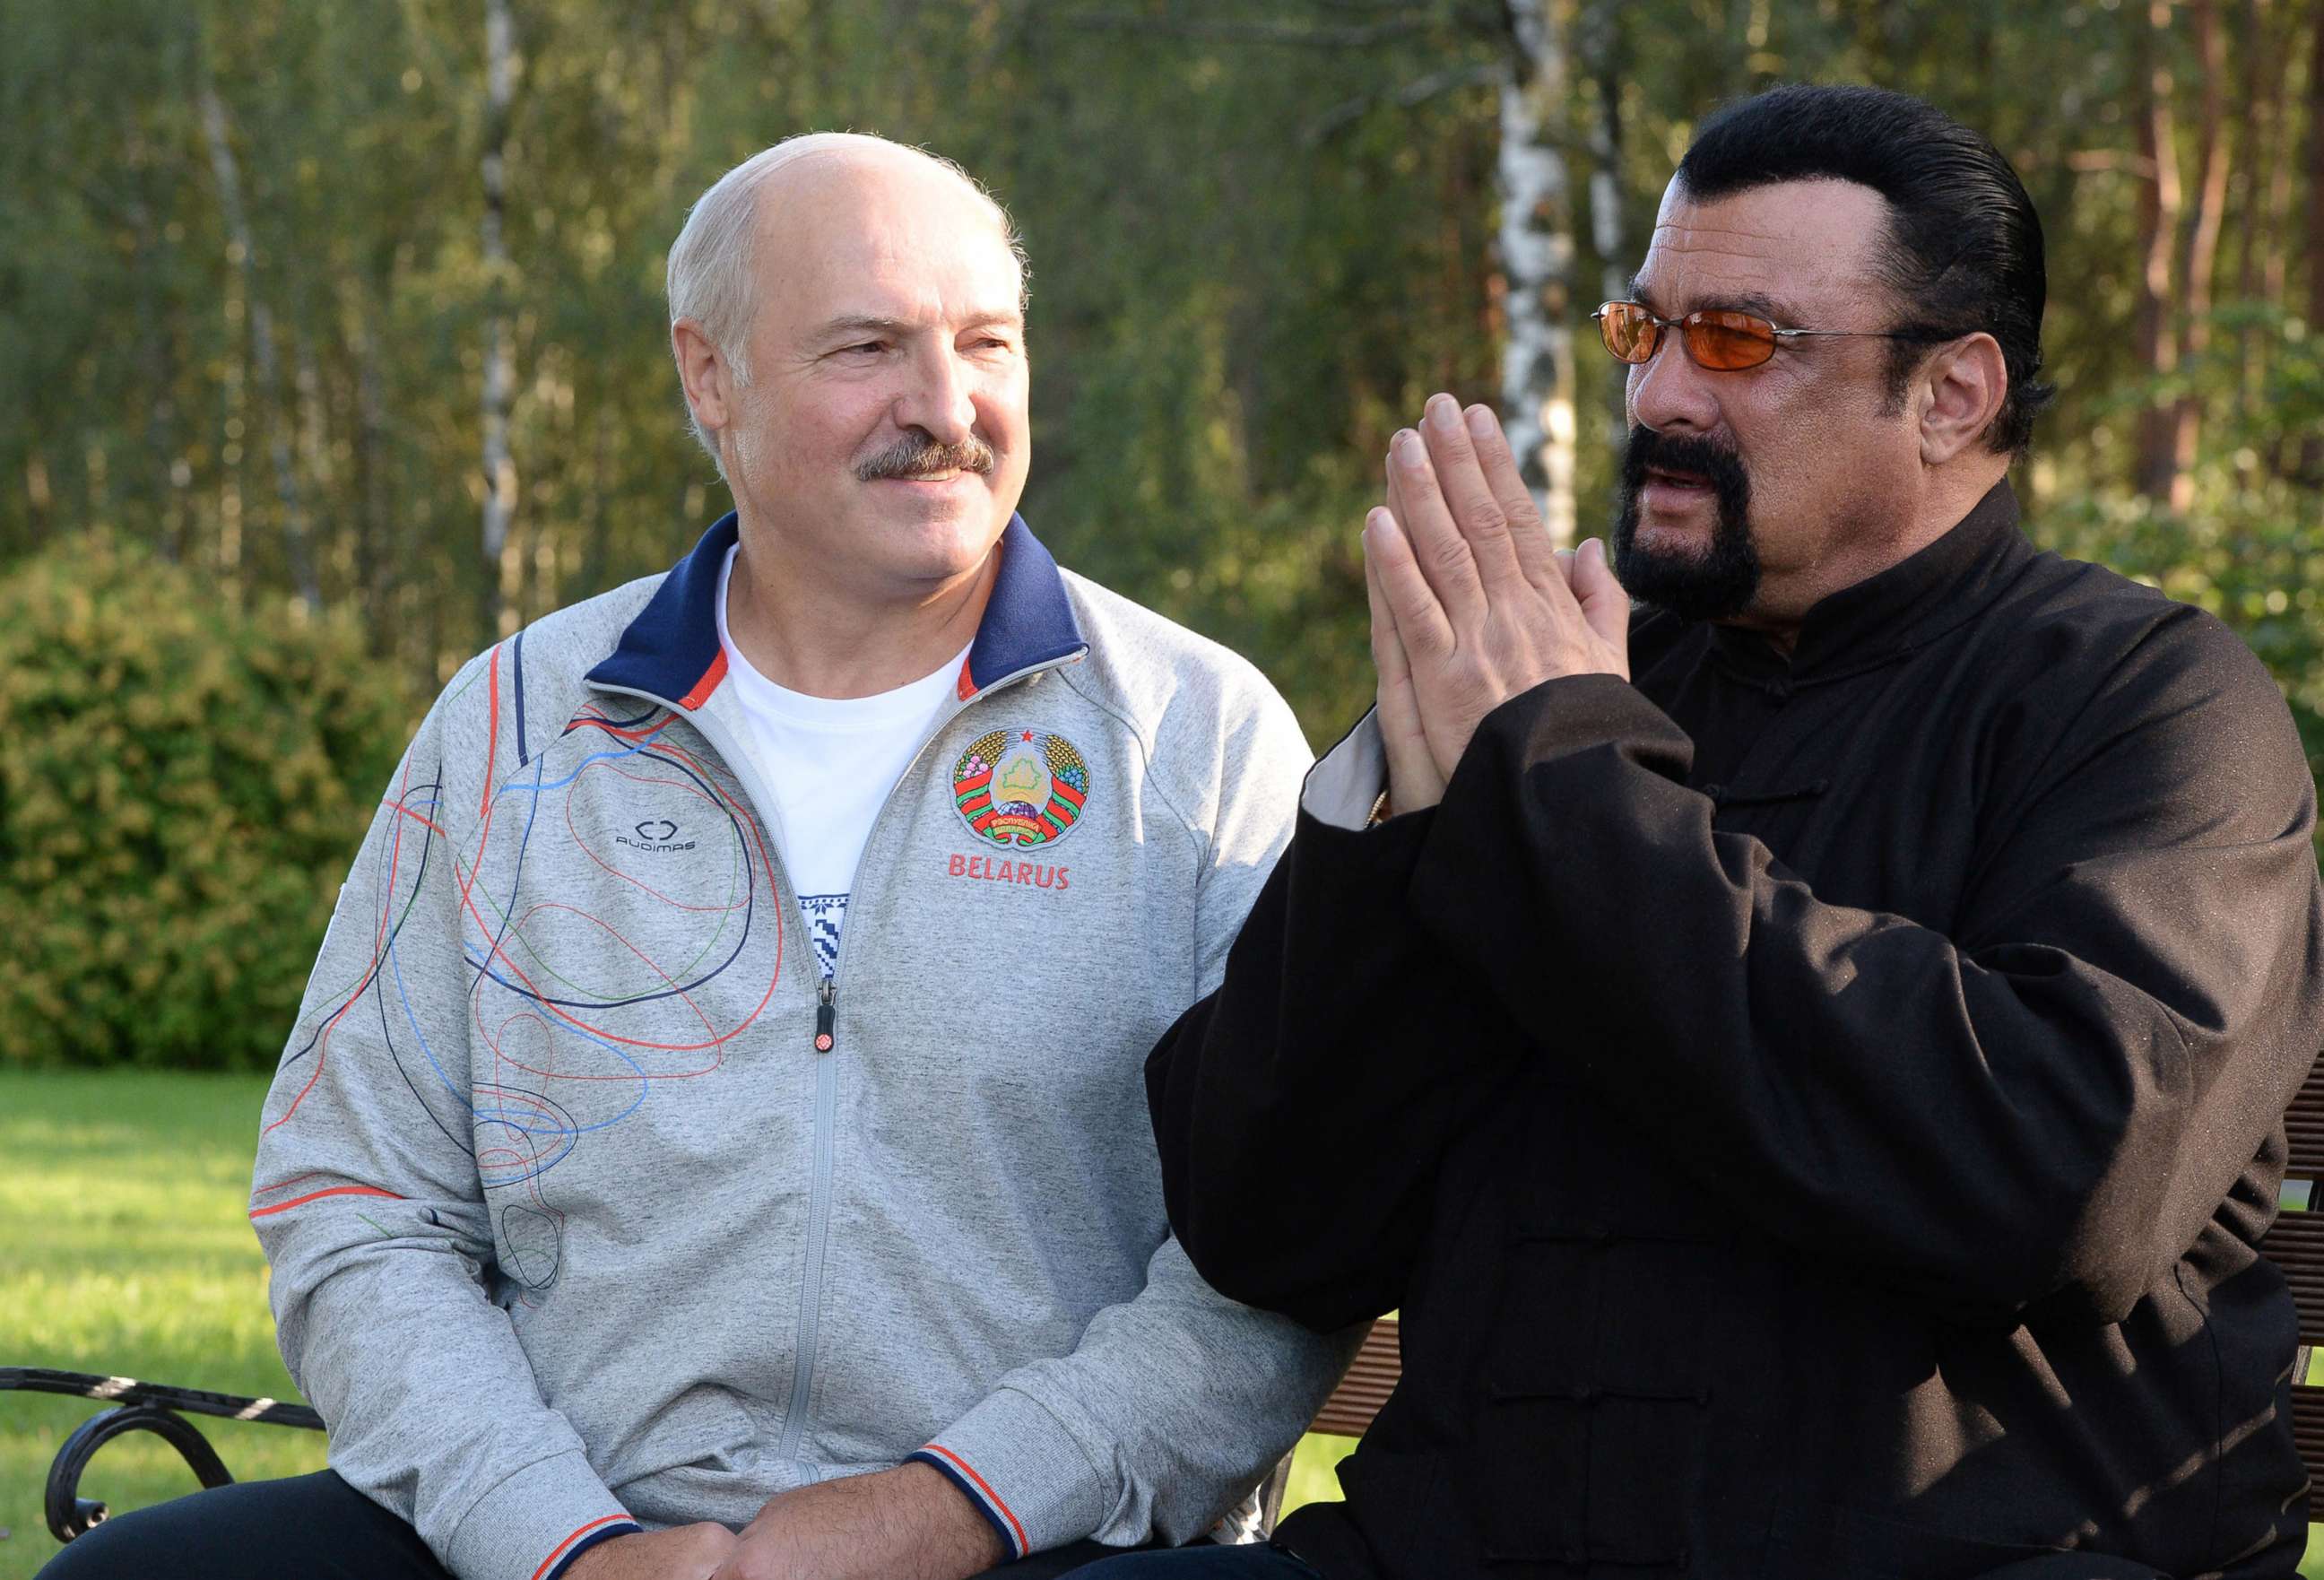 PHOTO: In this Aug. 24, 2016 photo, Belarusian President Alexander Lukashenko, left, meets with actor Steven Seagal in the presidential residence of Drozdy, outside Minsk, Belarus.